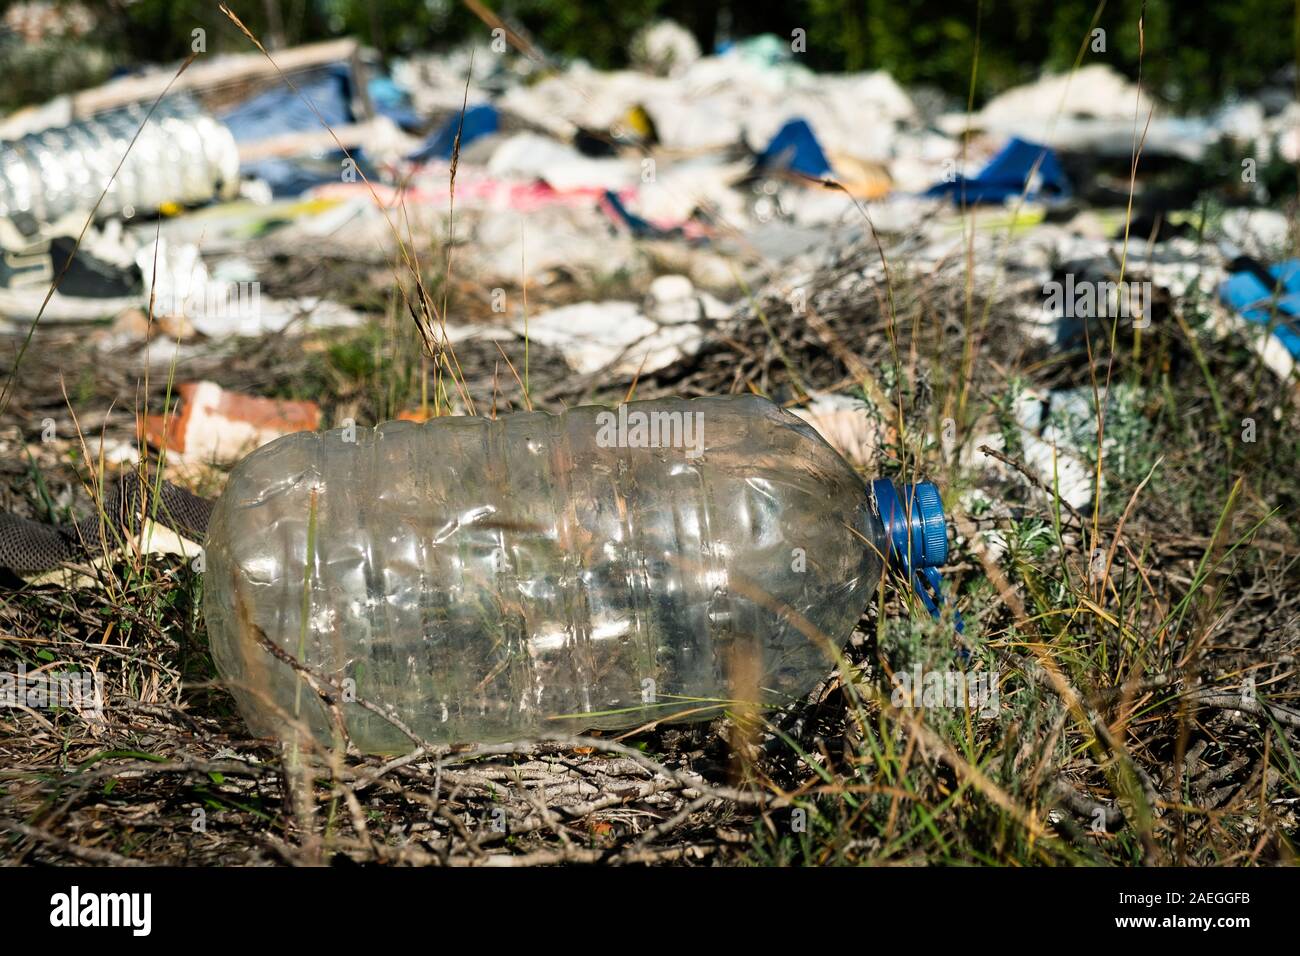 detail of a pile of garbage illegally dumped in an open dump in a forest Stock Photo